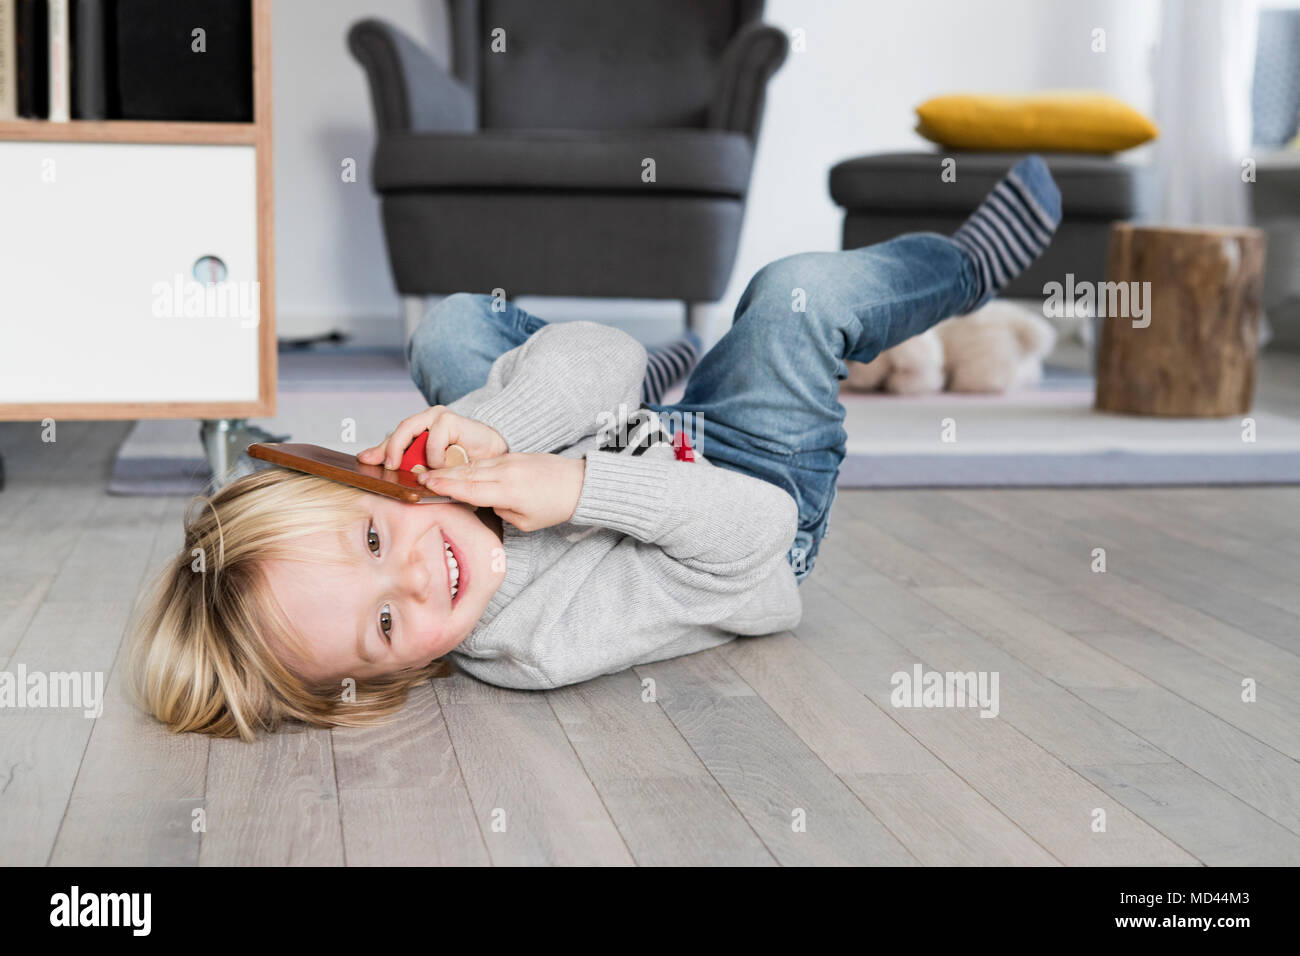 Young boy lying on floor, holding smartphone to ear, smiling Stock Photo